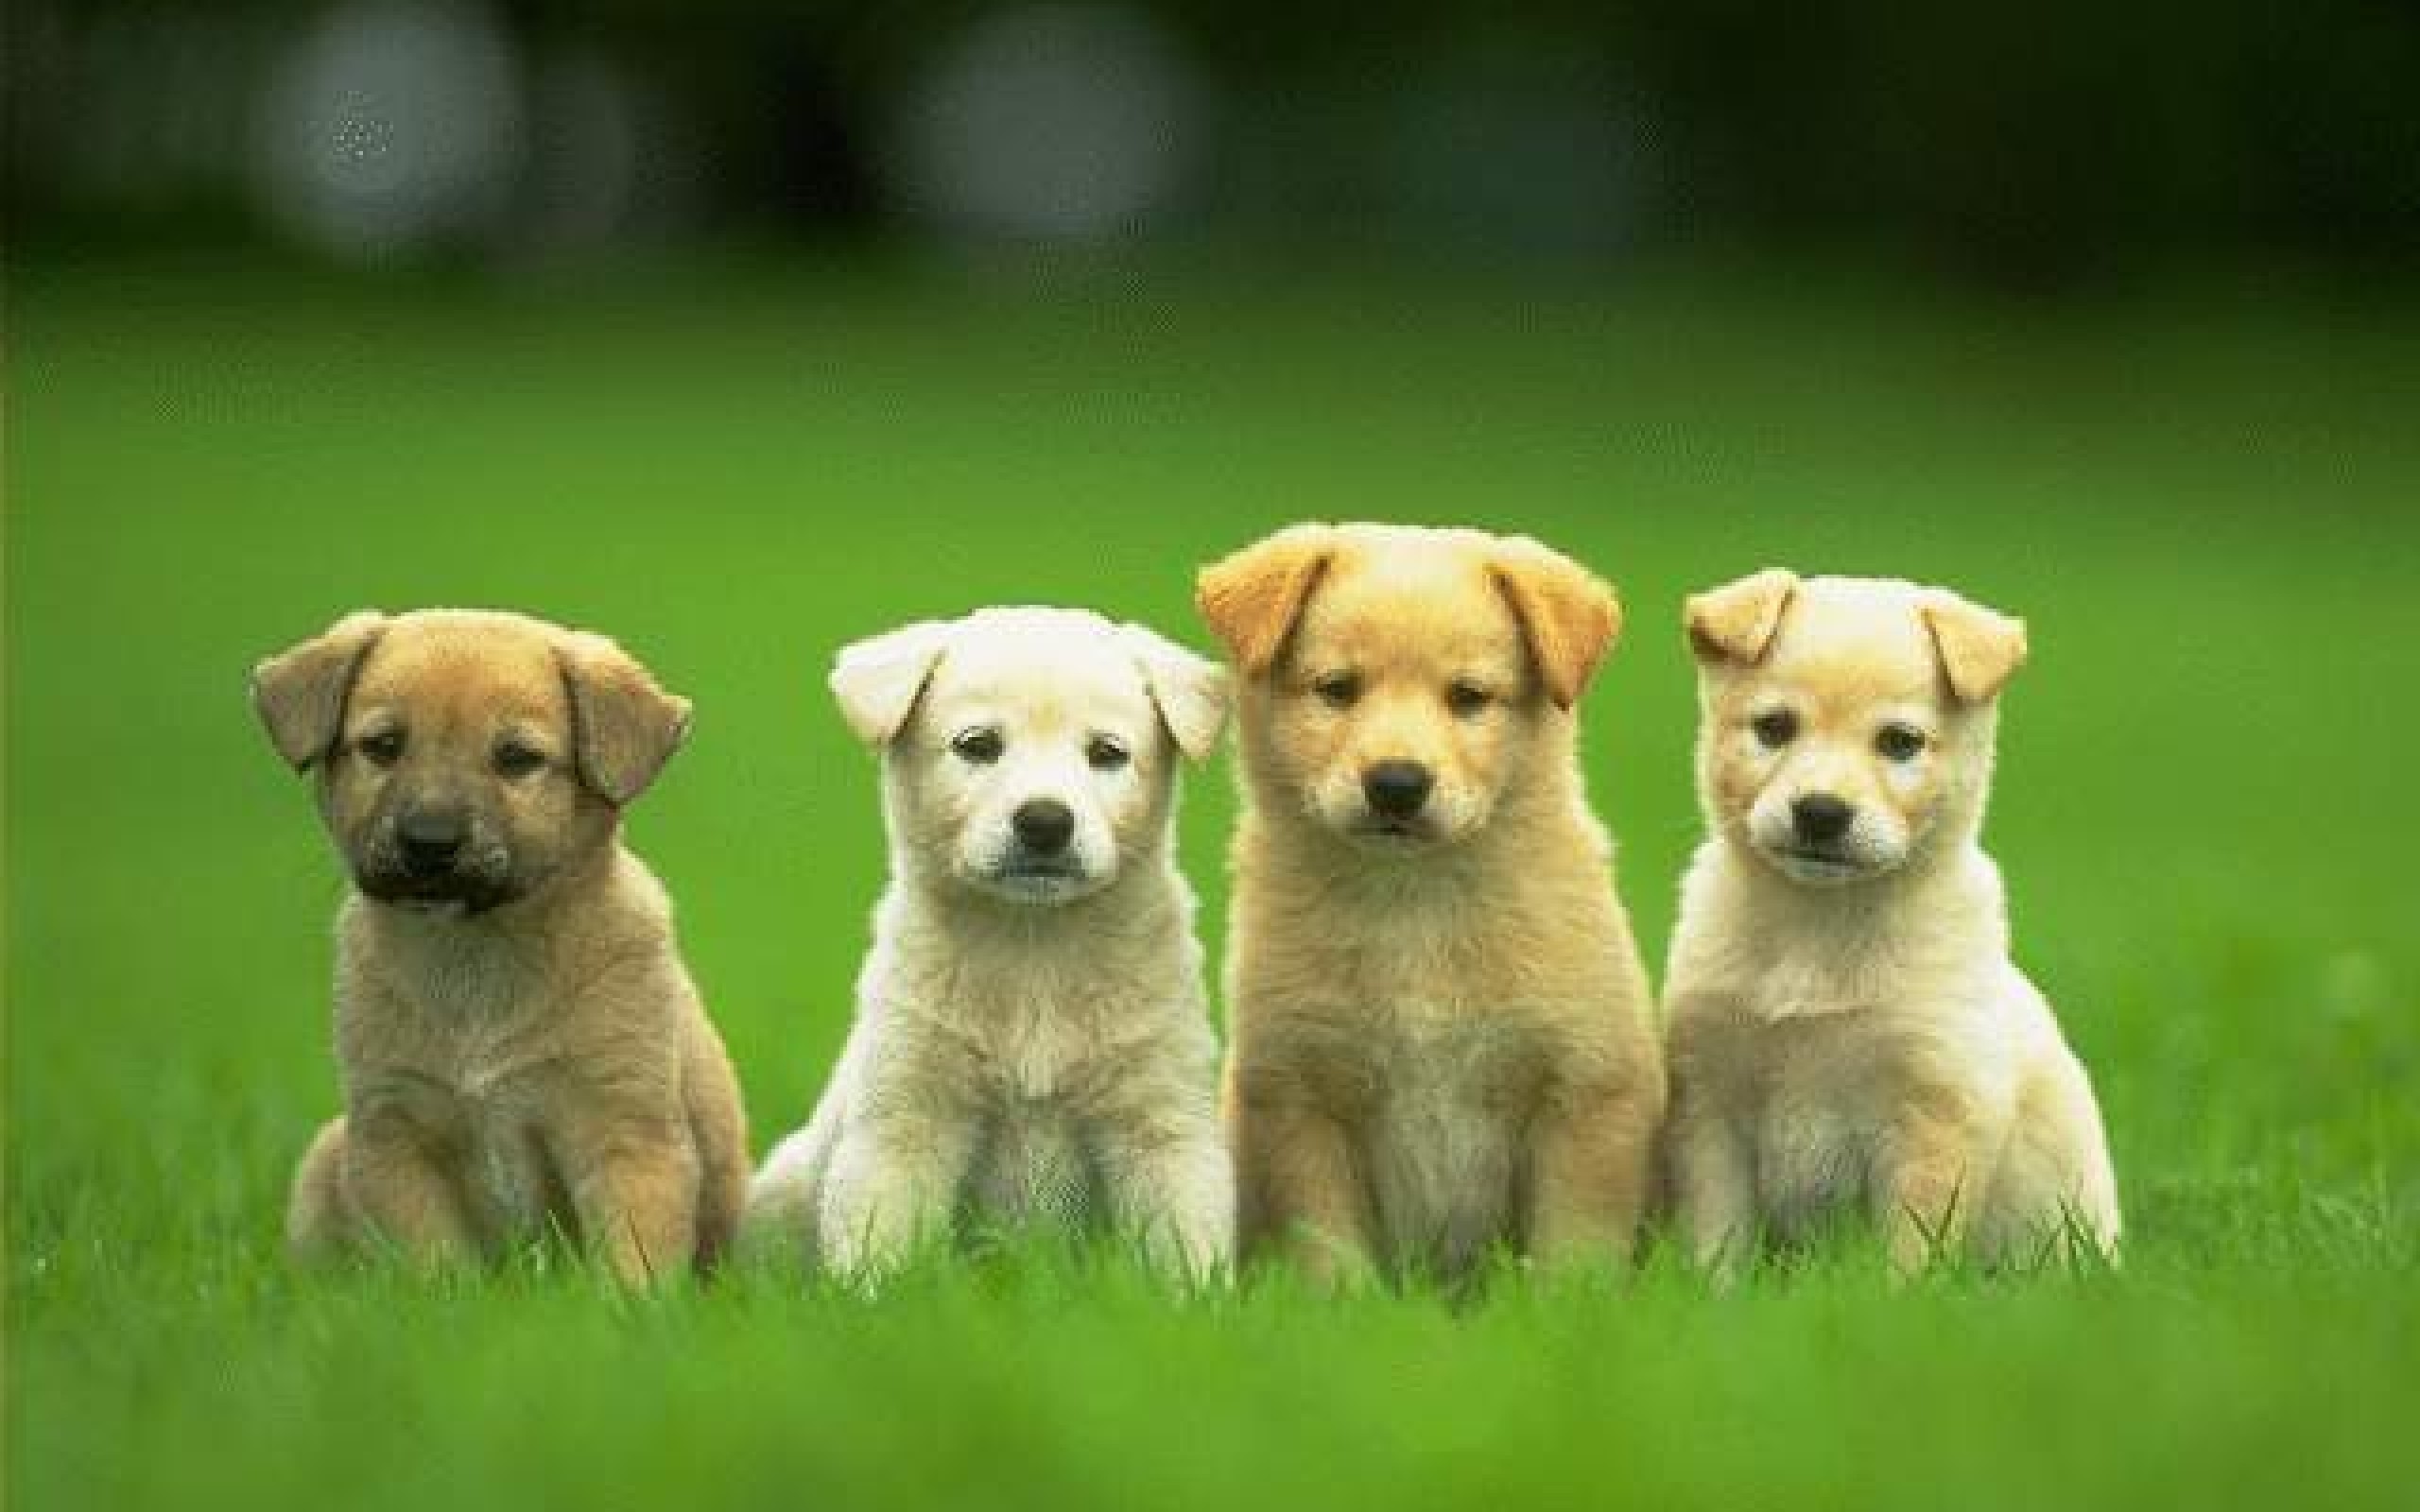 2560x1600 Hd cute dog wallpapers free for desktop